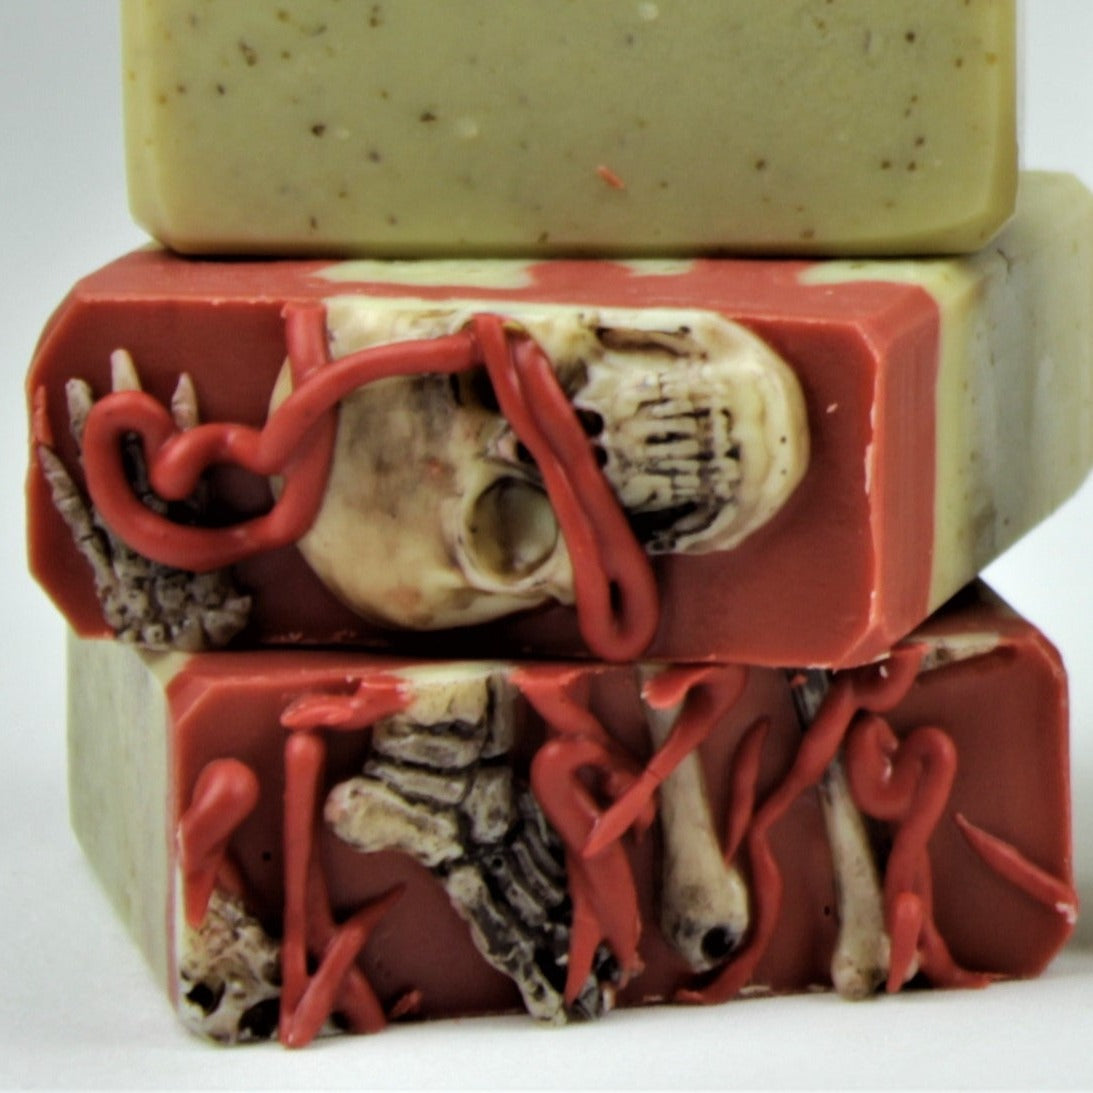 Tops of two bars of Breakfast at Jeff's soaps.  Tops have soap bones on a sea of red soap, and are topped with splattered red soap resembling blood. 